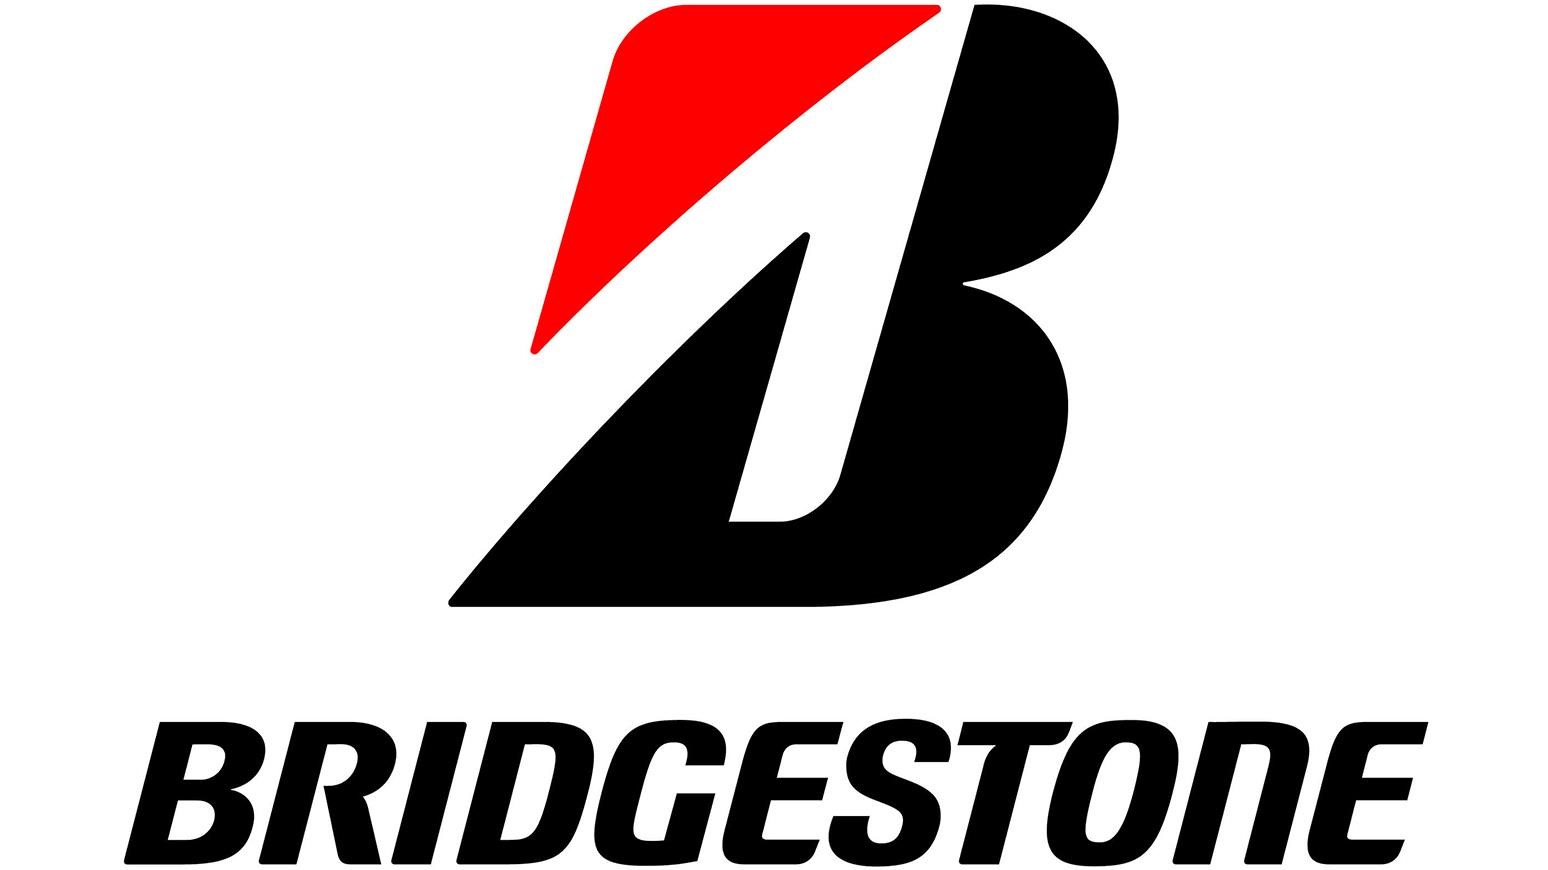 Bridgestone To Display Mobility Solutions, Product Innovations & Tyres At IAA 2019 In Frankfurt, Germany